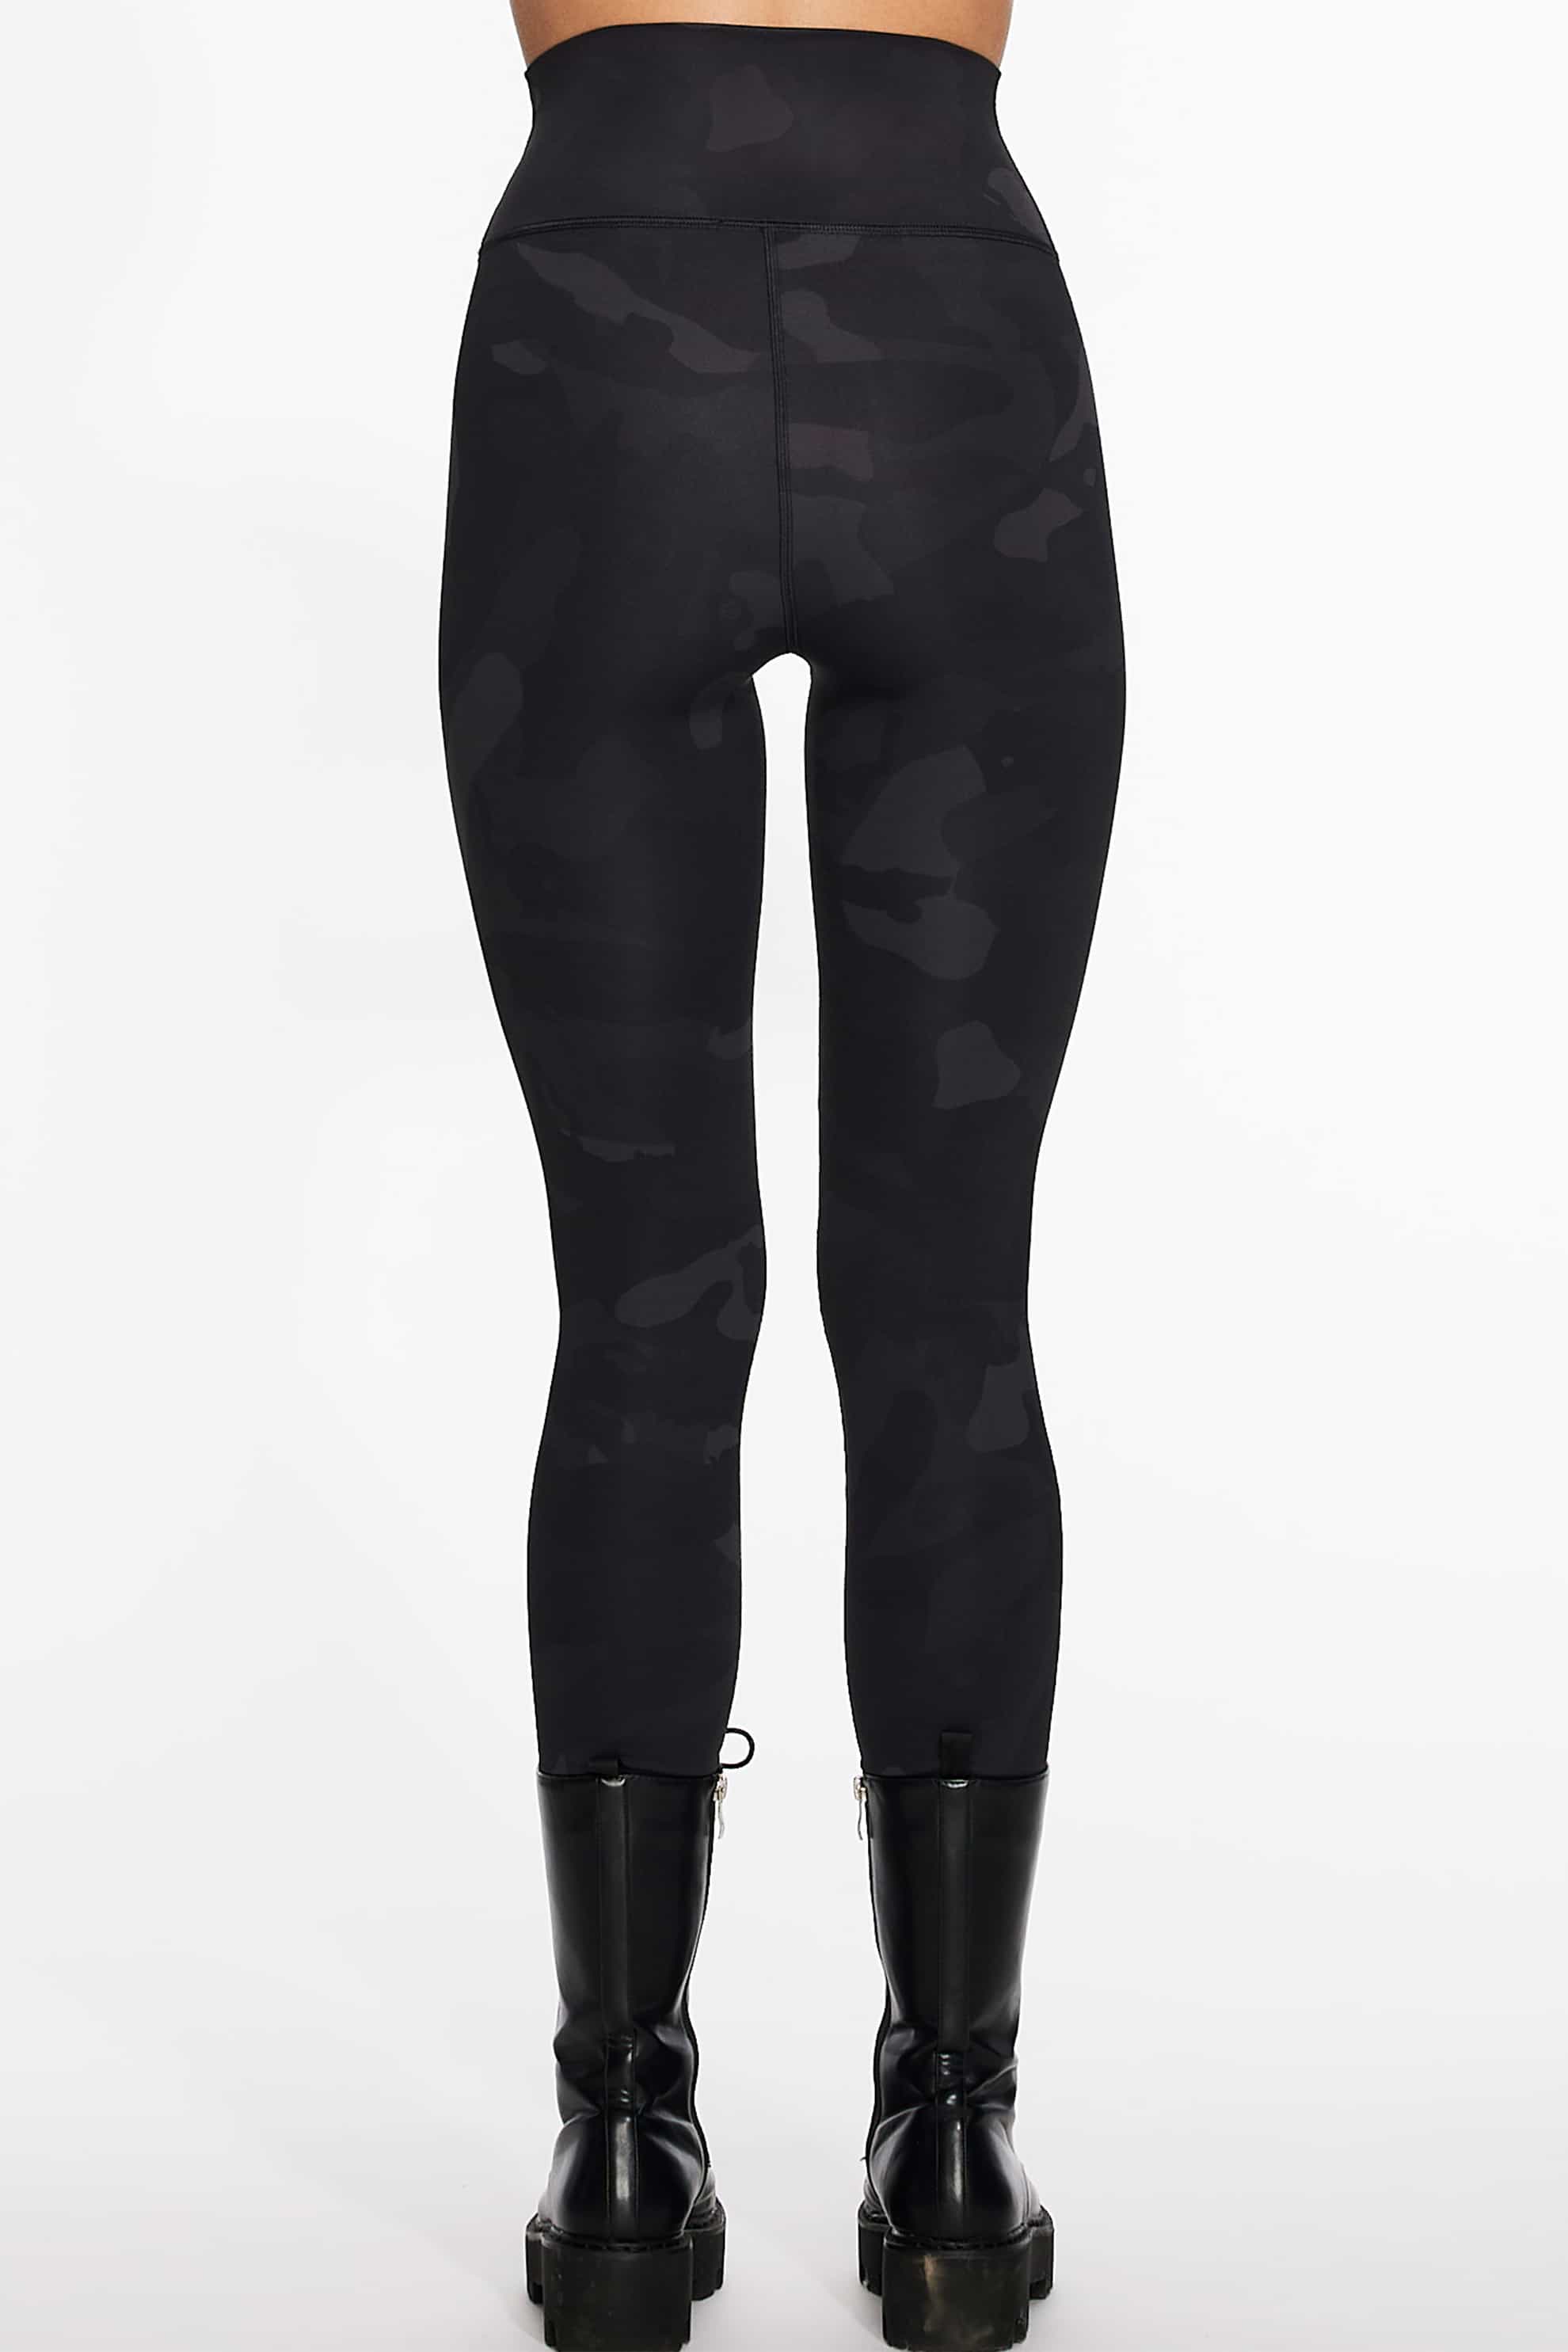 Fairway Camo Leggings  Shop the Highest Quality Golf Apparel, Gear,  Accessories and Golf Clubs at PXG